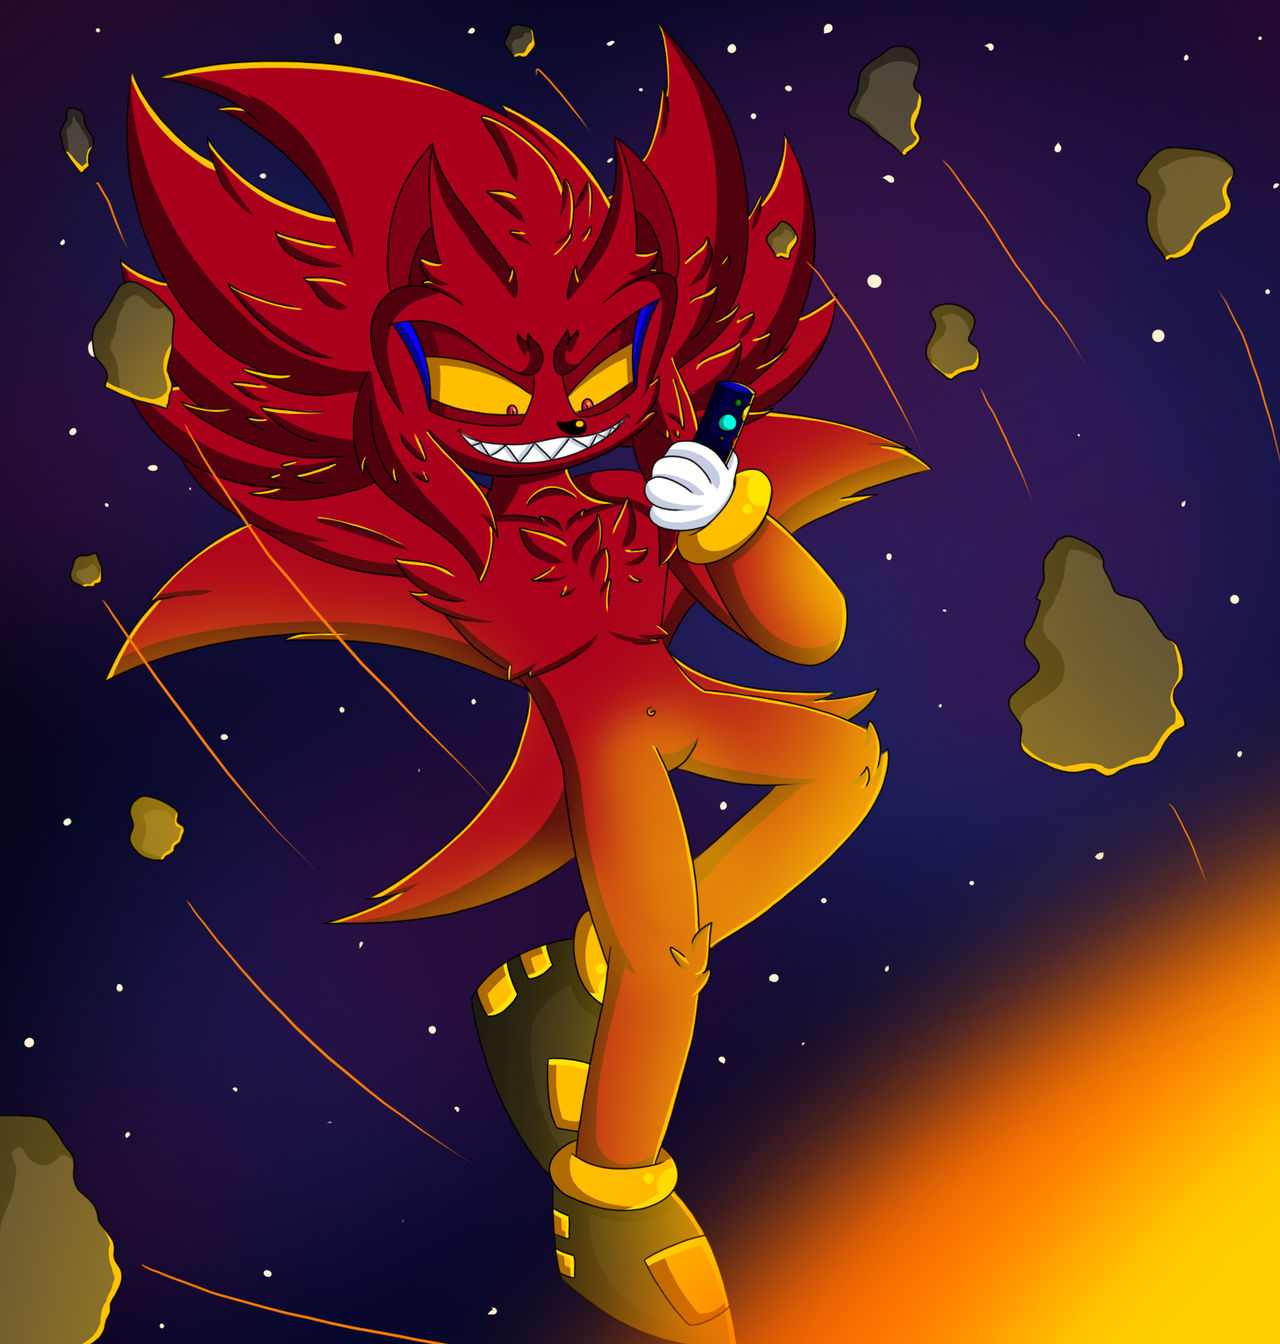 Sonic Frontiers: THE END by Damingeris on DeviantArt